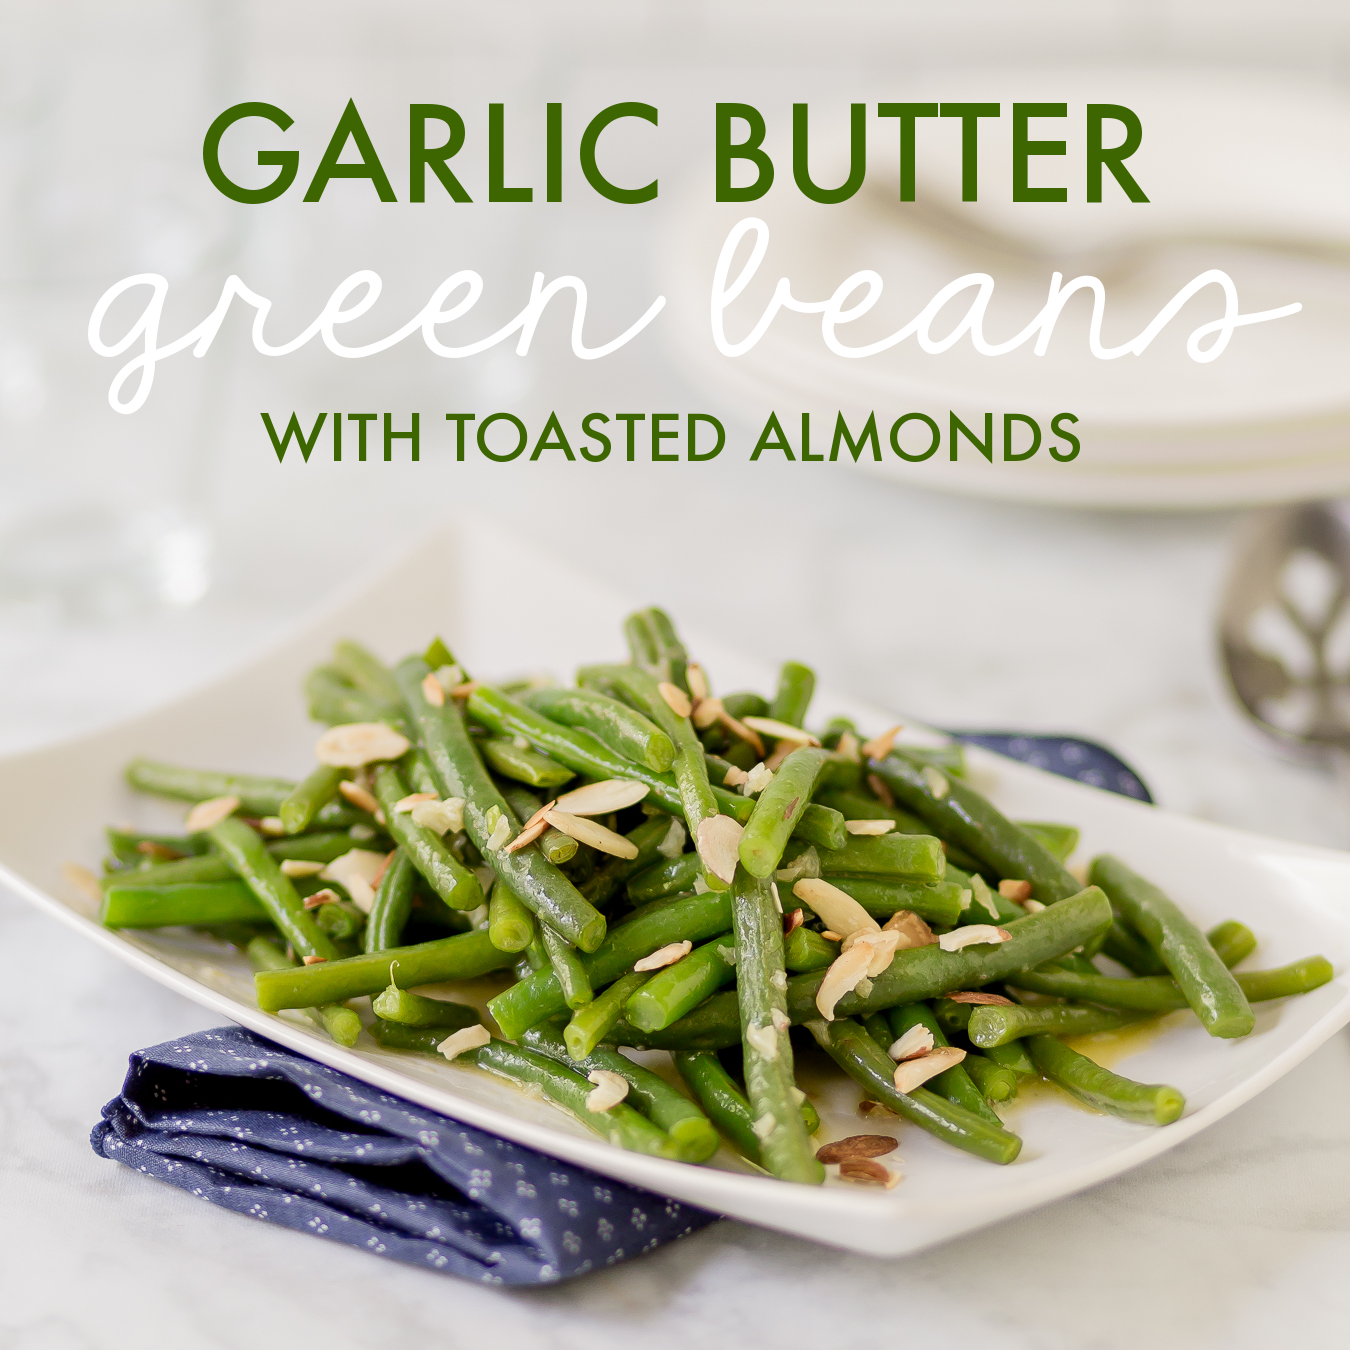 Garlic Butter Green Beans With Toasted Almonds